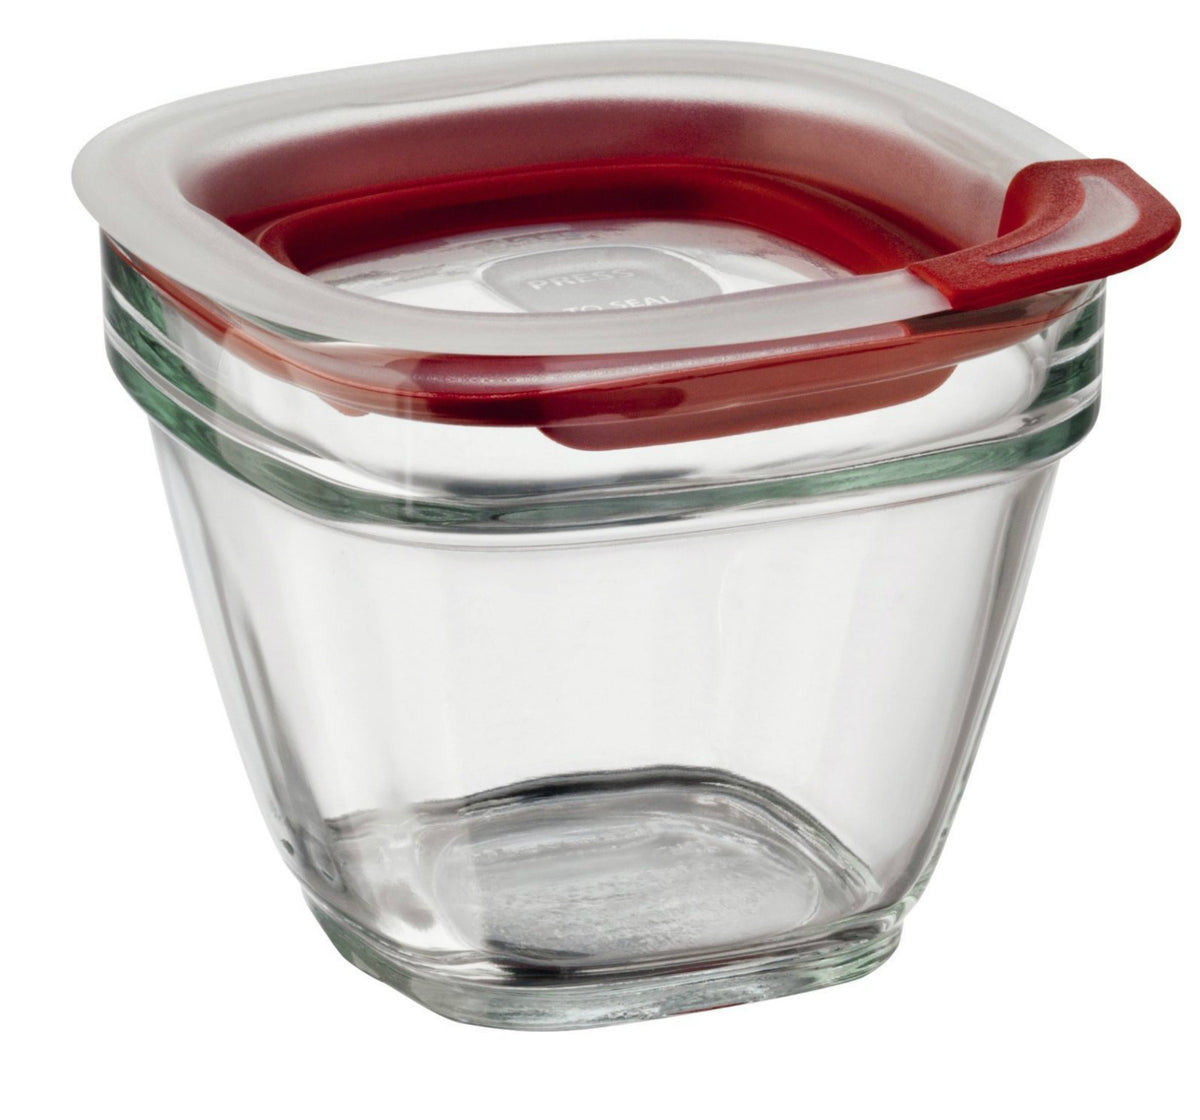 buy food containers at cheap rate in bulk. wholesale & retail kitchen tools & supplies store.